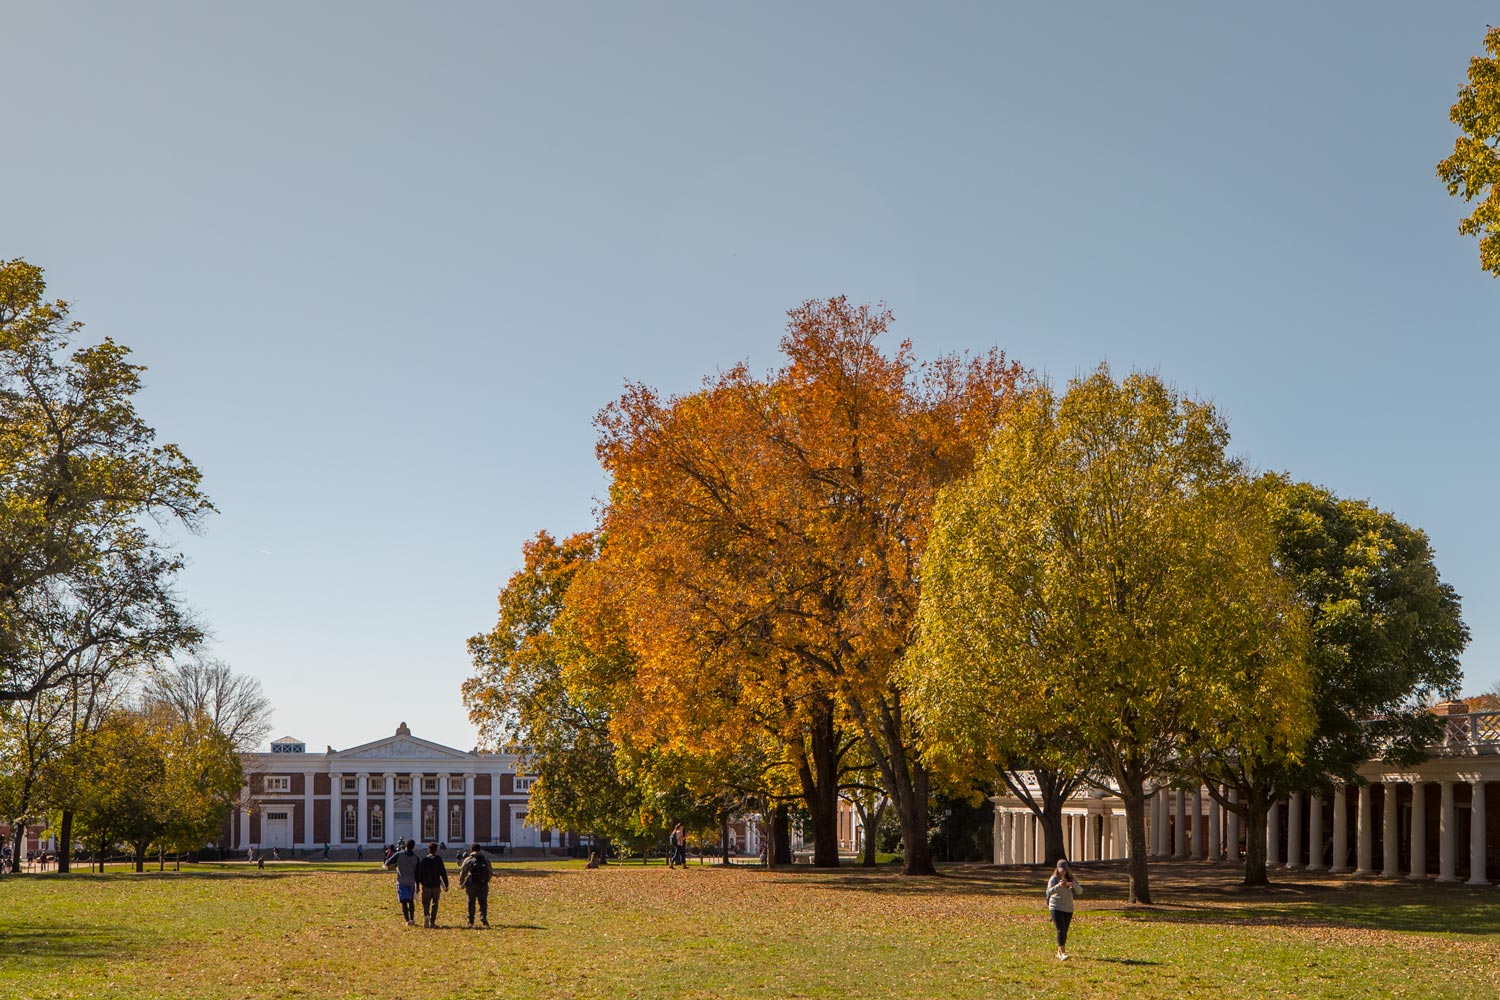 Old Cabell hall from the Lawn with trees changing into fall colors